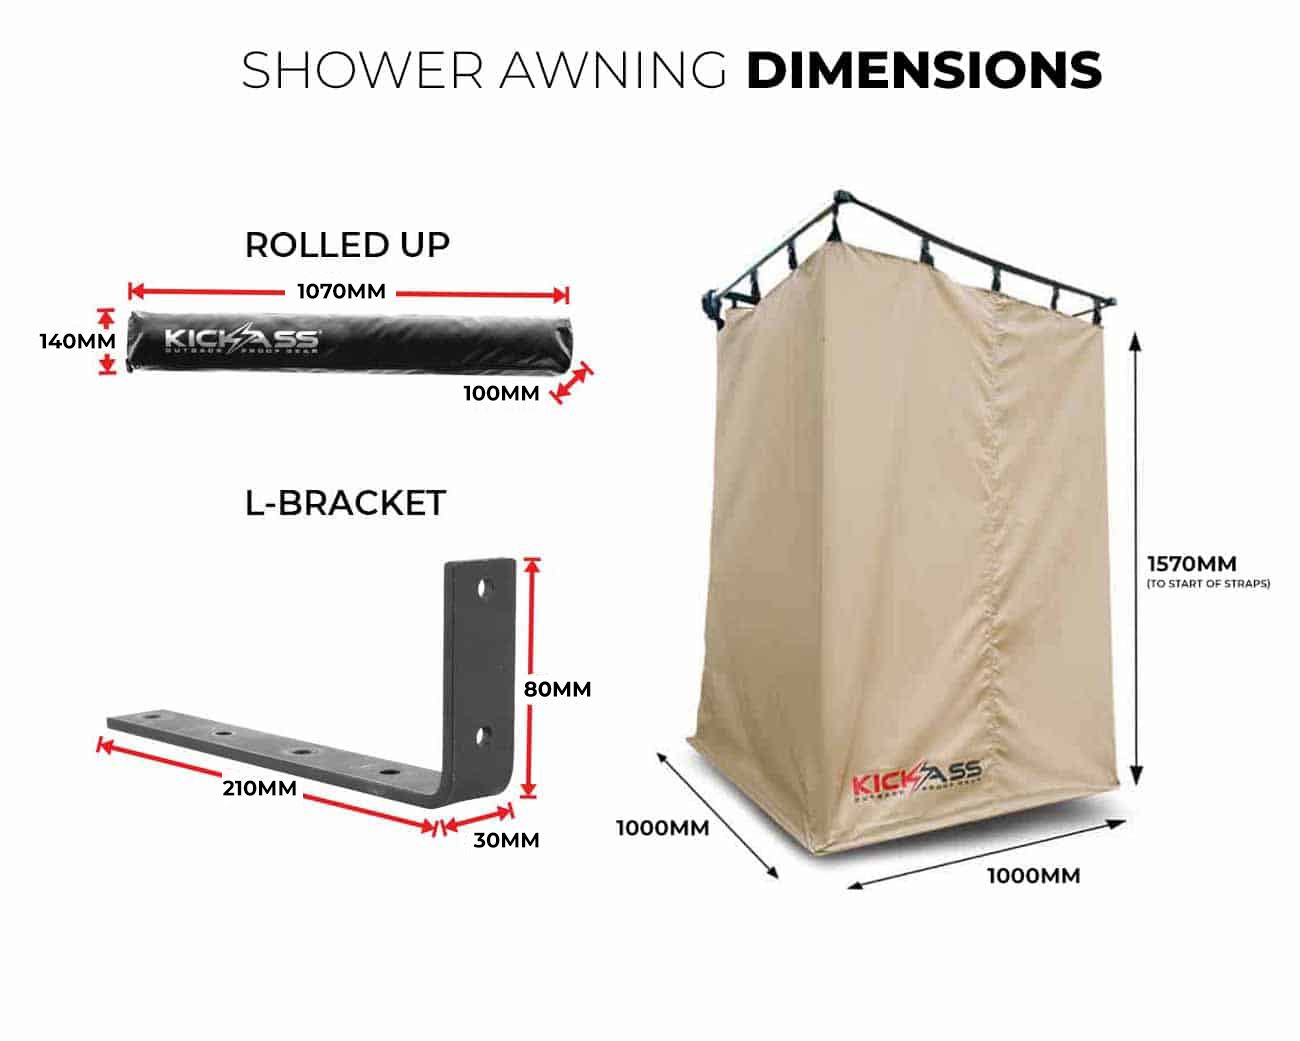 Shower awning dimensions